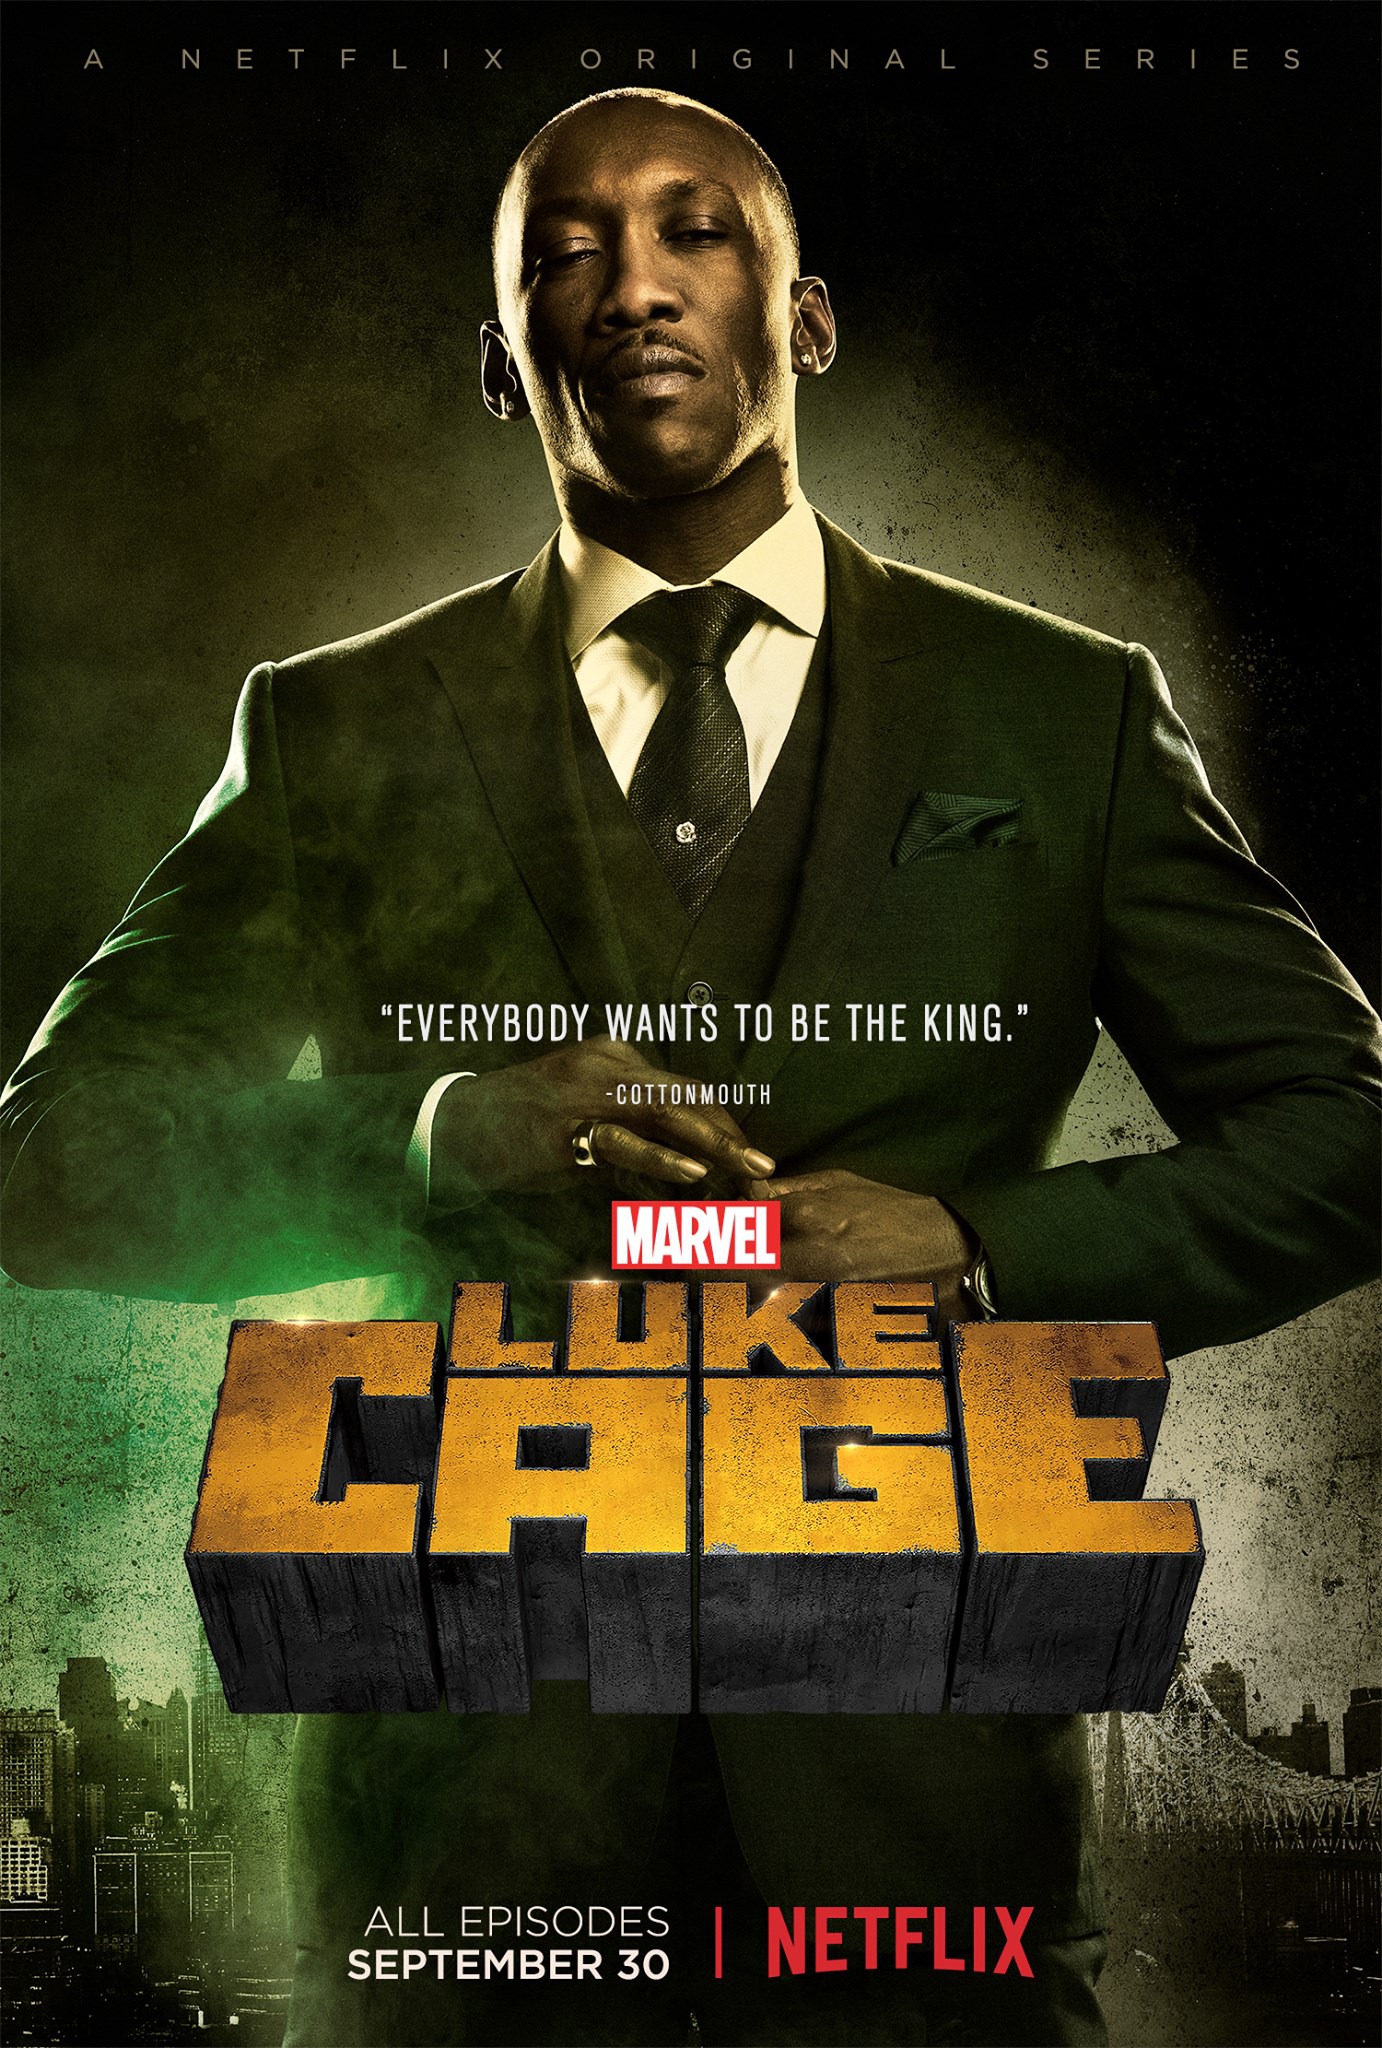 Marvel's Luke Cage busts out the awesome character posters | SciFiNow